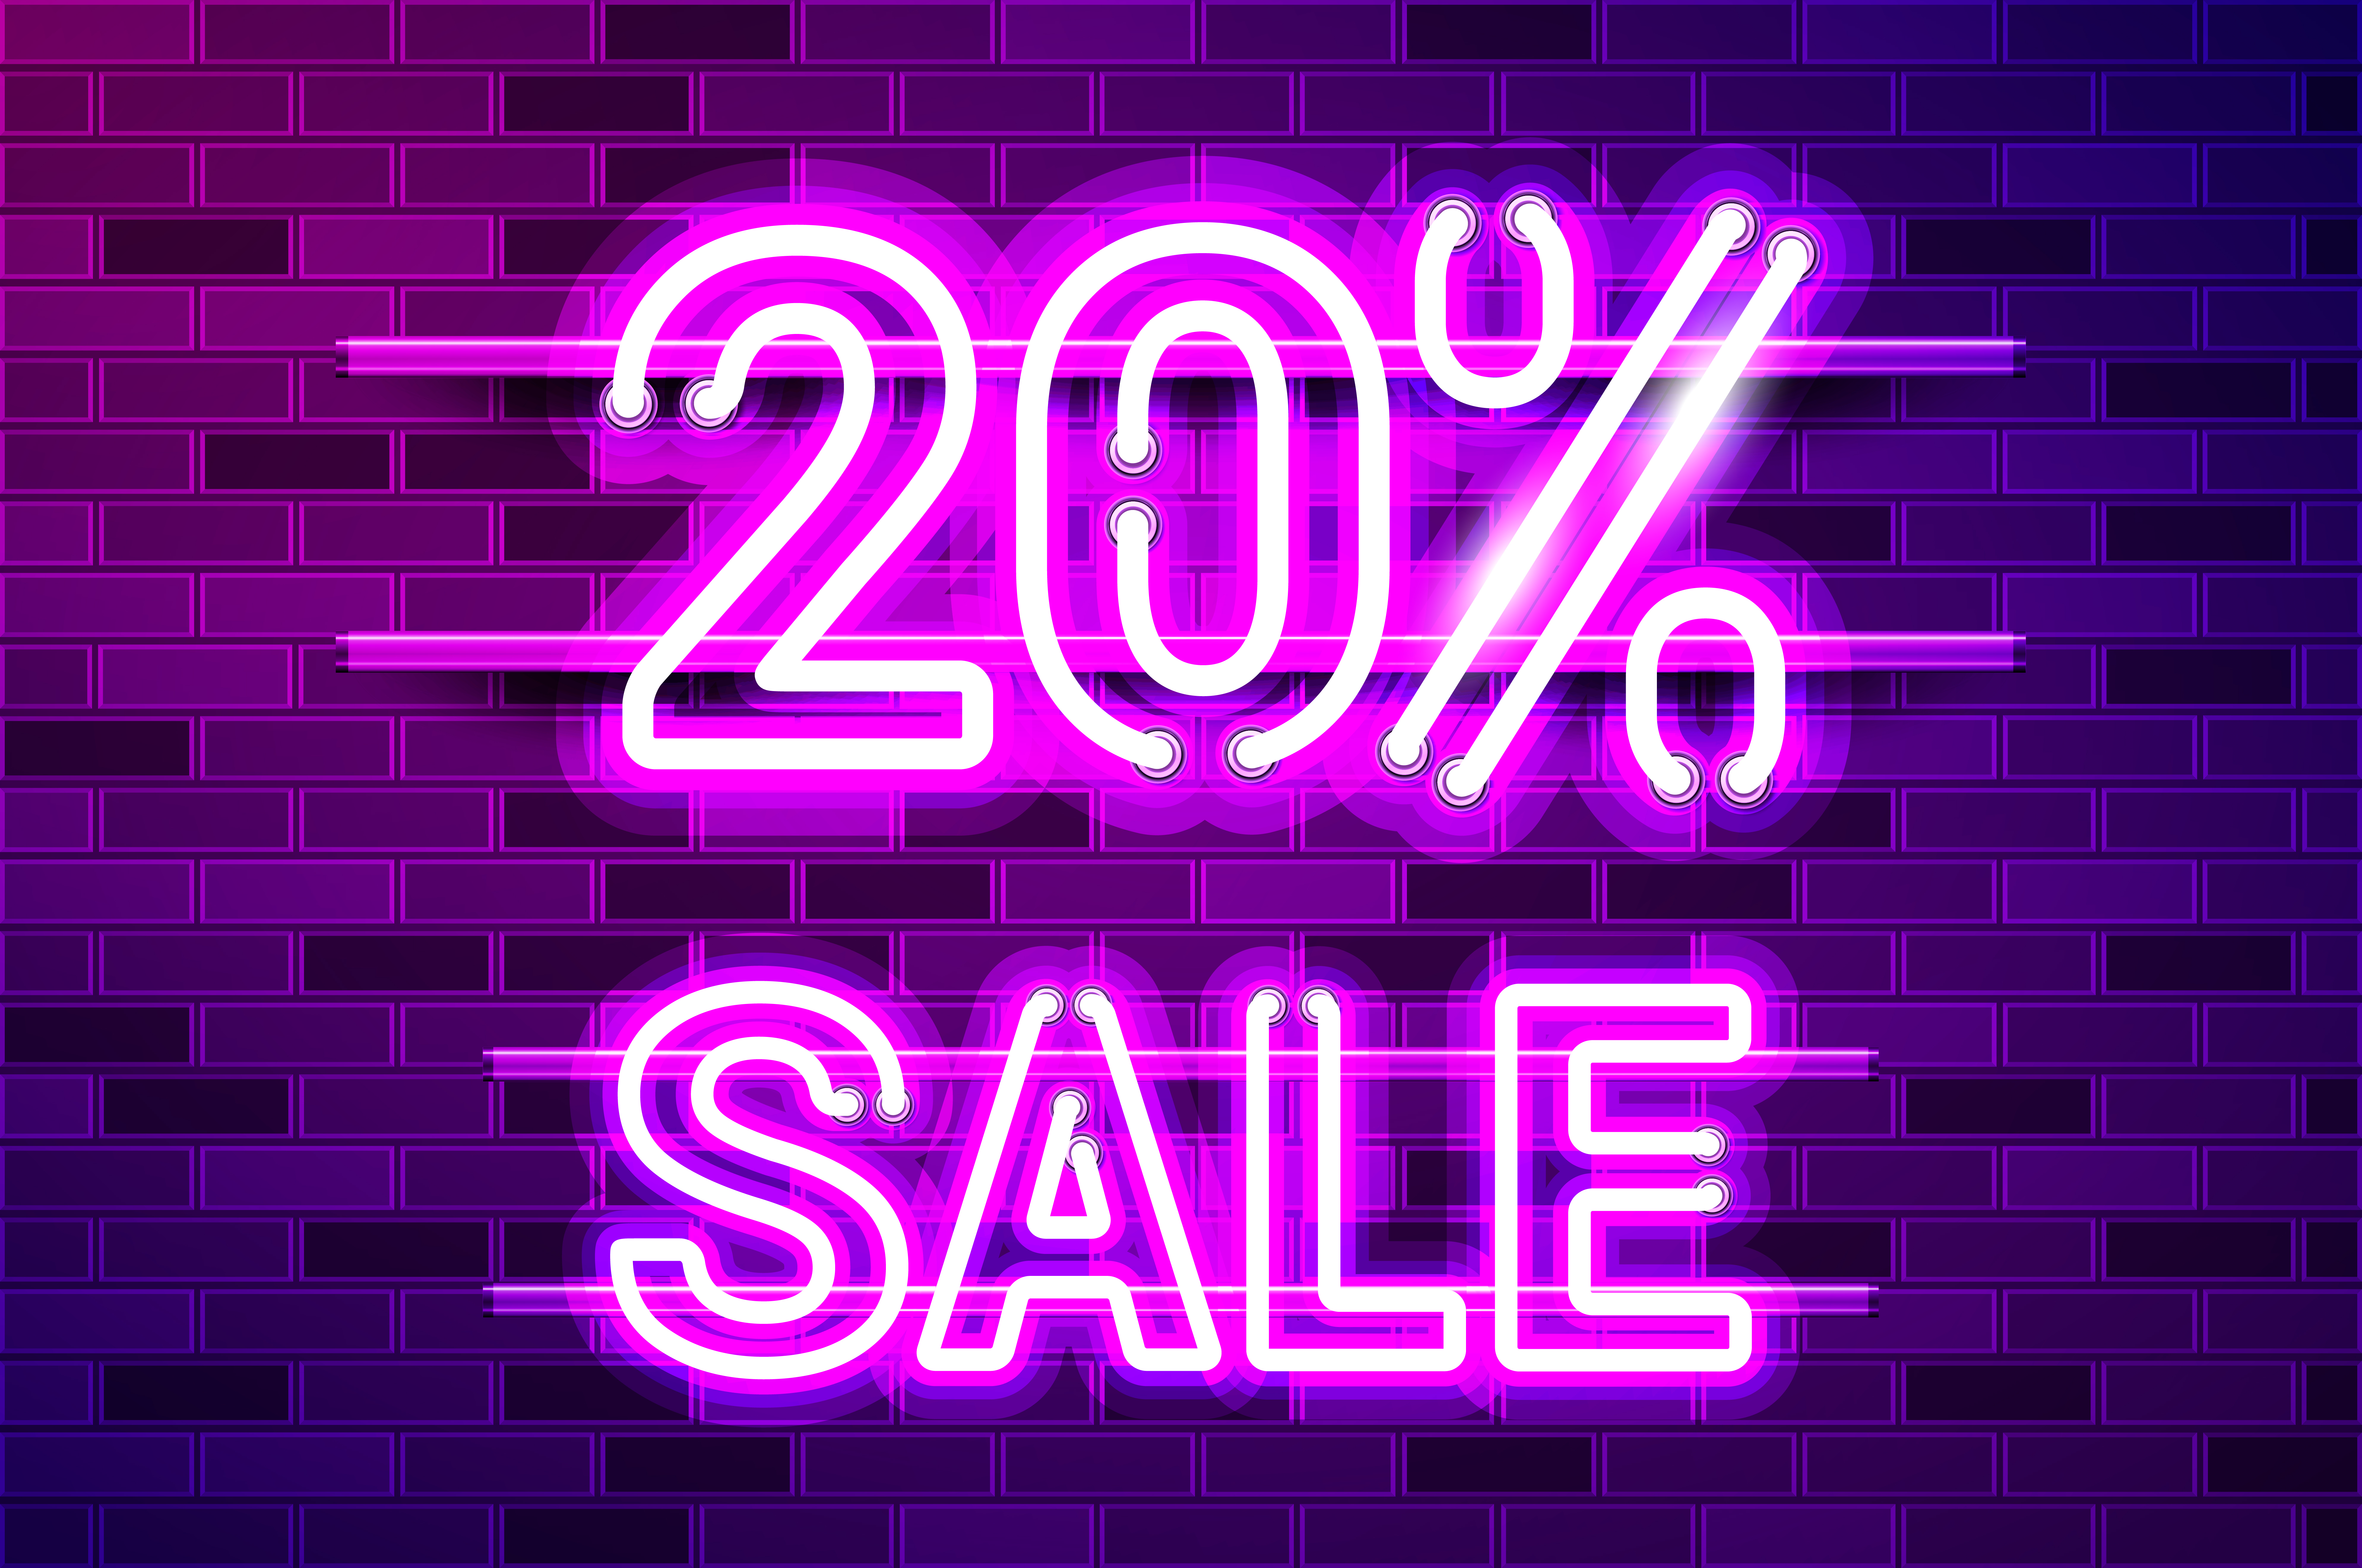 20 percent SALE glowing neon lamp sign. Realistic vector illustration. Purple brick wall, violet glow, metal holders.. 20 percent SALE glowing purple neon lamp sign